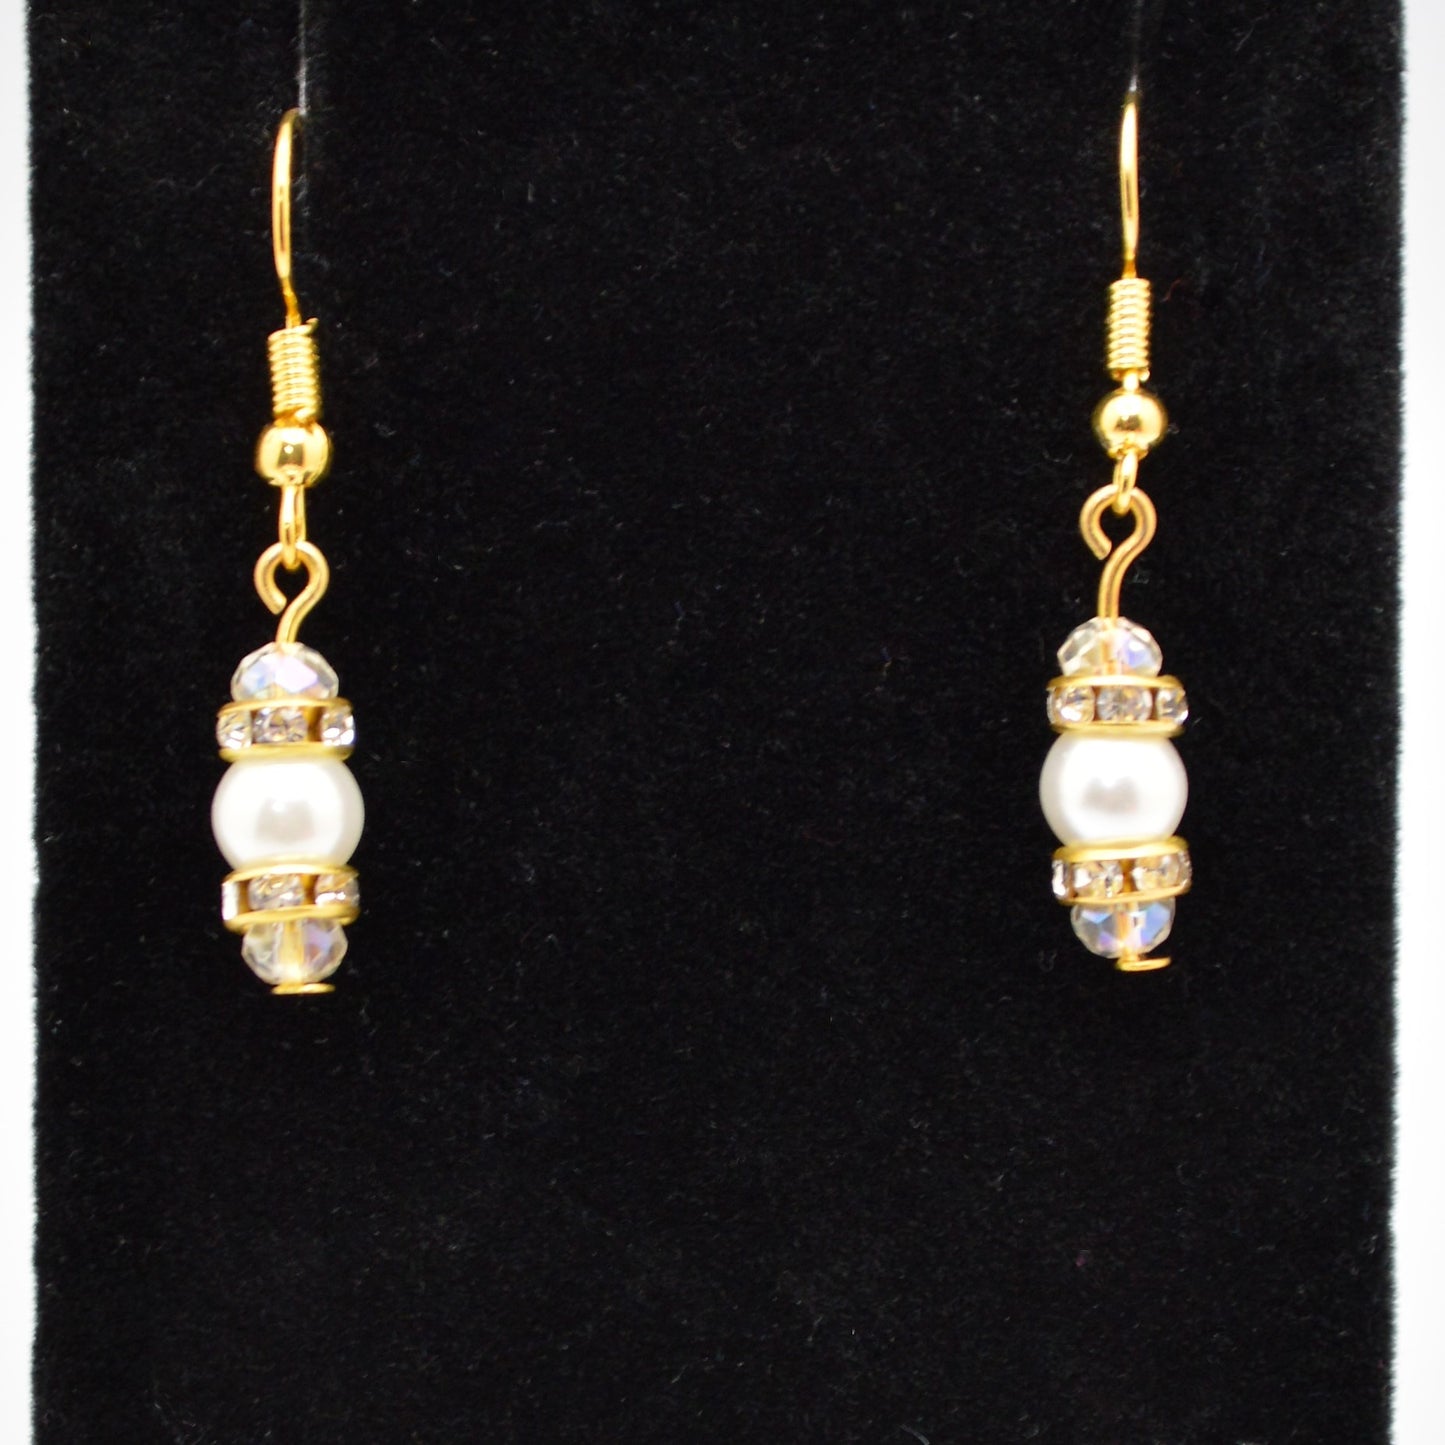 White Glass Pearl and Crystal Earrings (6mm Pearls with Gold Hooks)